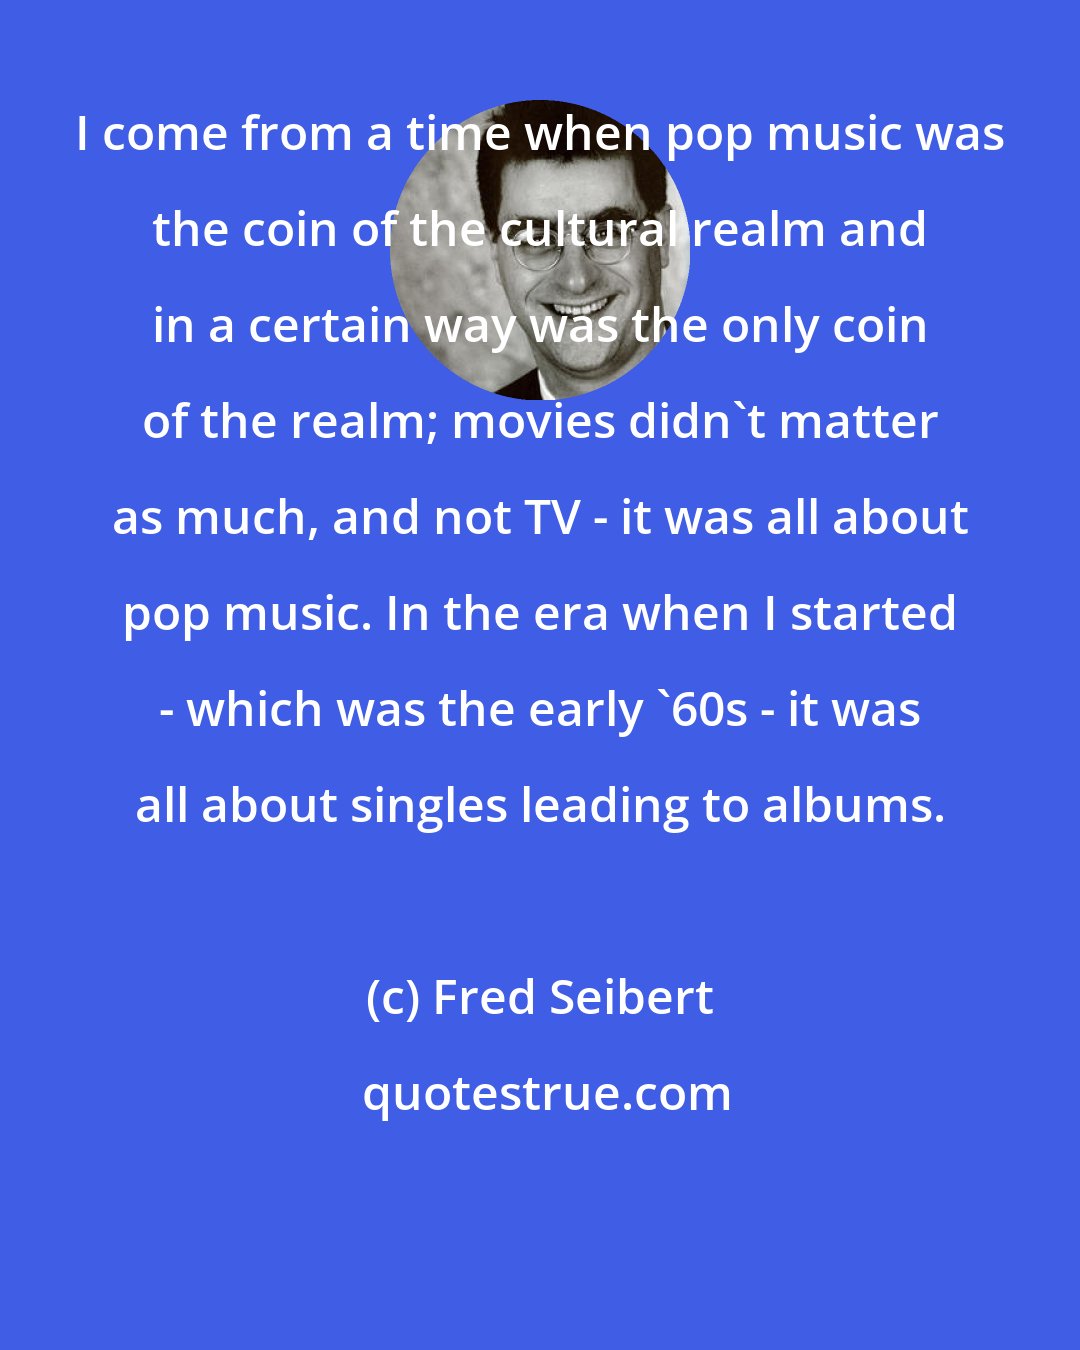 Fred Seibert: I come from a time when pop music was the coin of the cultural realm and in a certain way was the only coin of the realm; movies didn't matter as much, and not TV - it was all about pop music. In the era when I started - which was the early '60s - it was all about singles leading to albums.